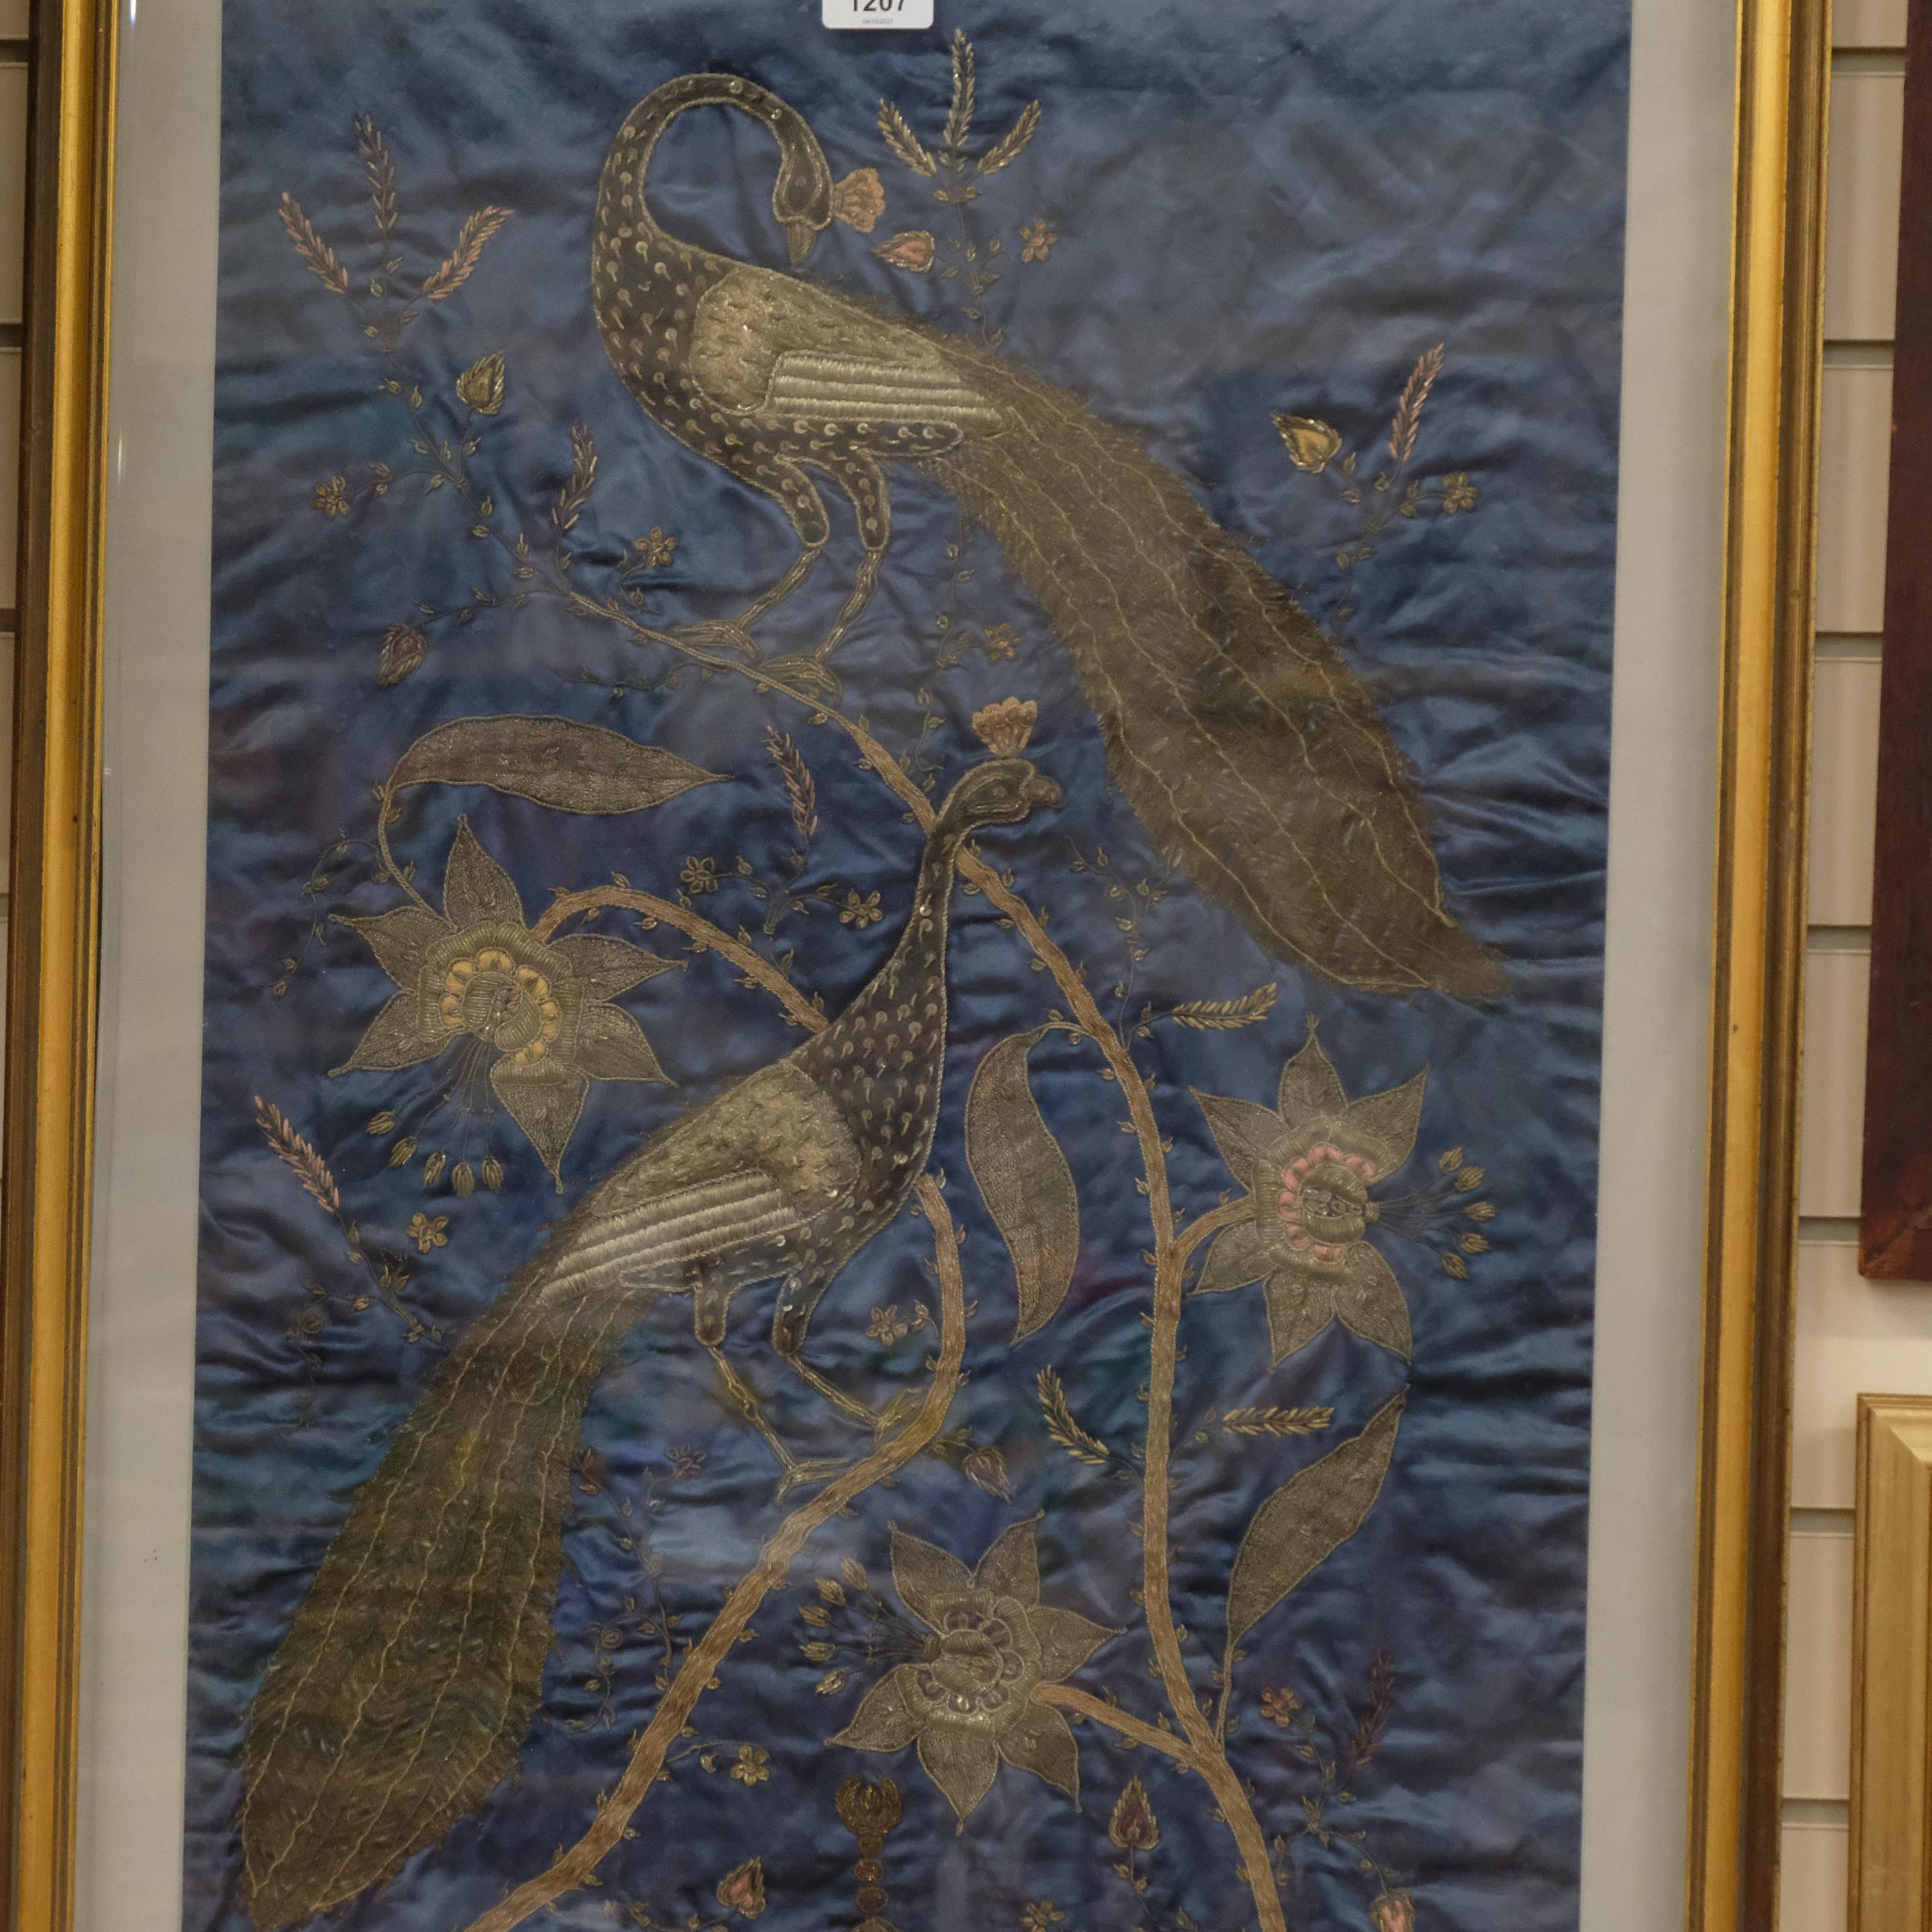 Late 19th century Indian silver braid embroidered picture, depicting peacocks and roses with - Image 2 of 2